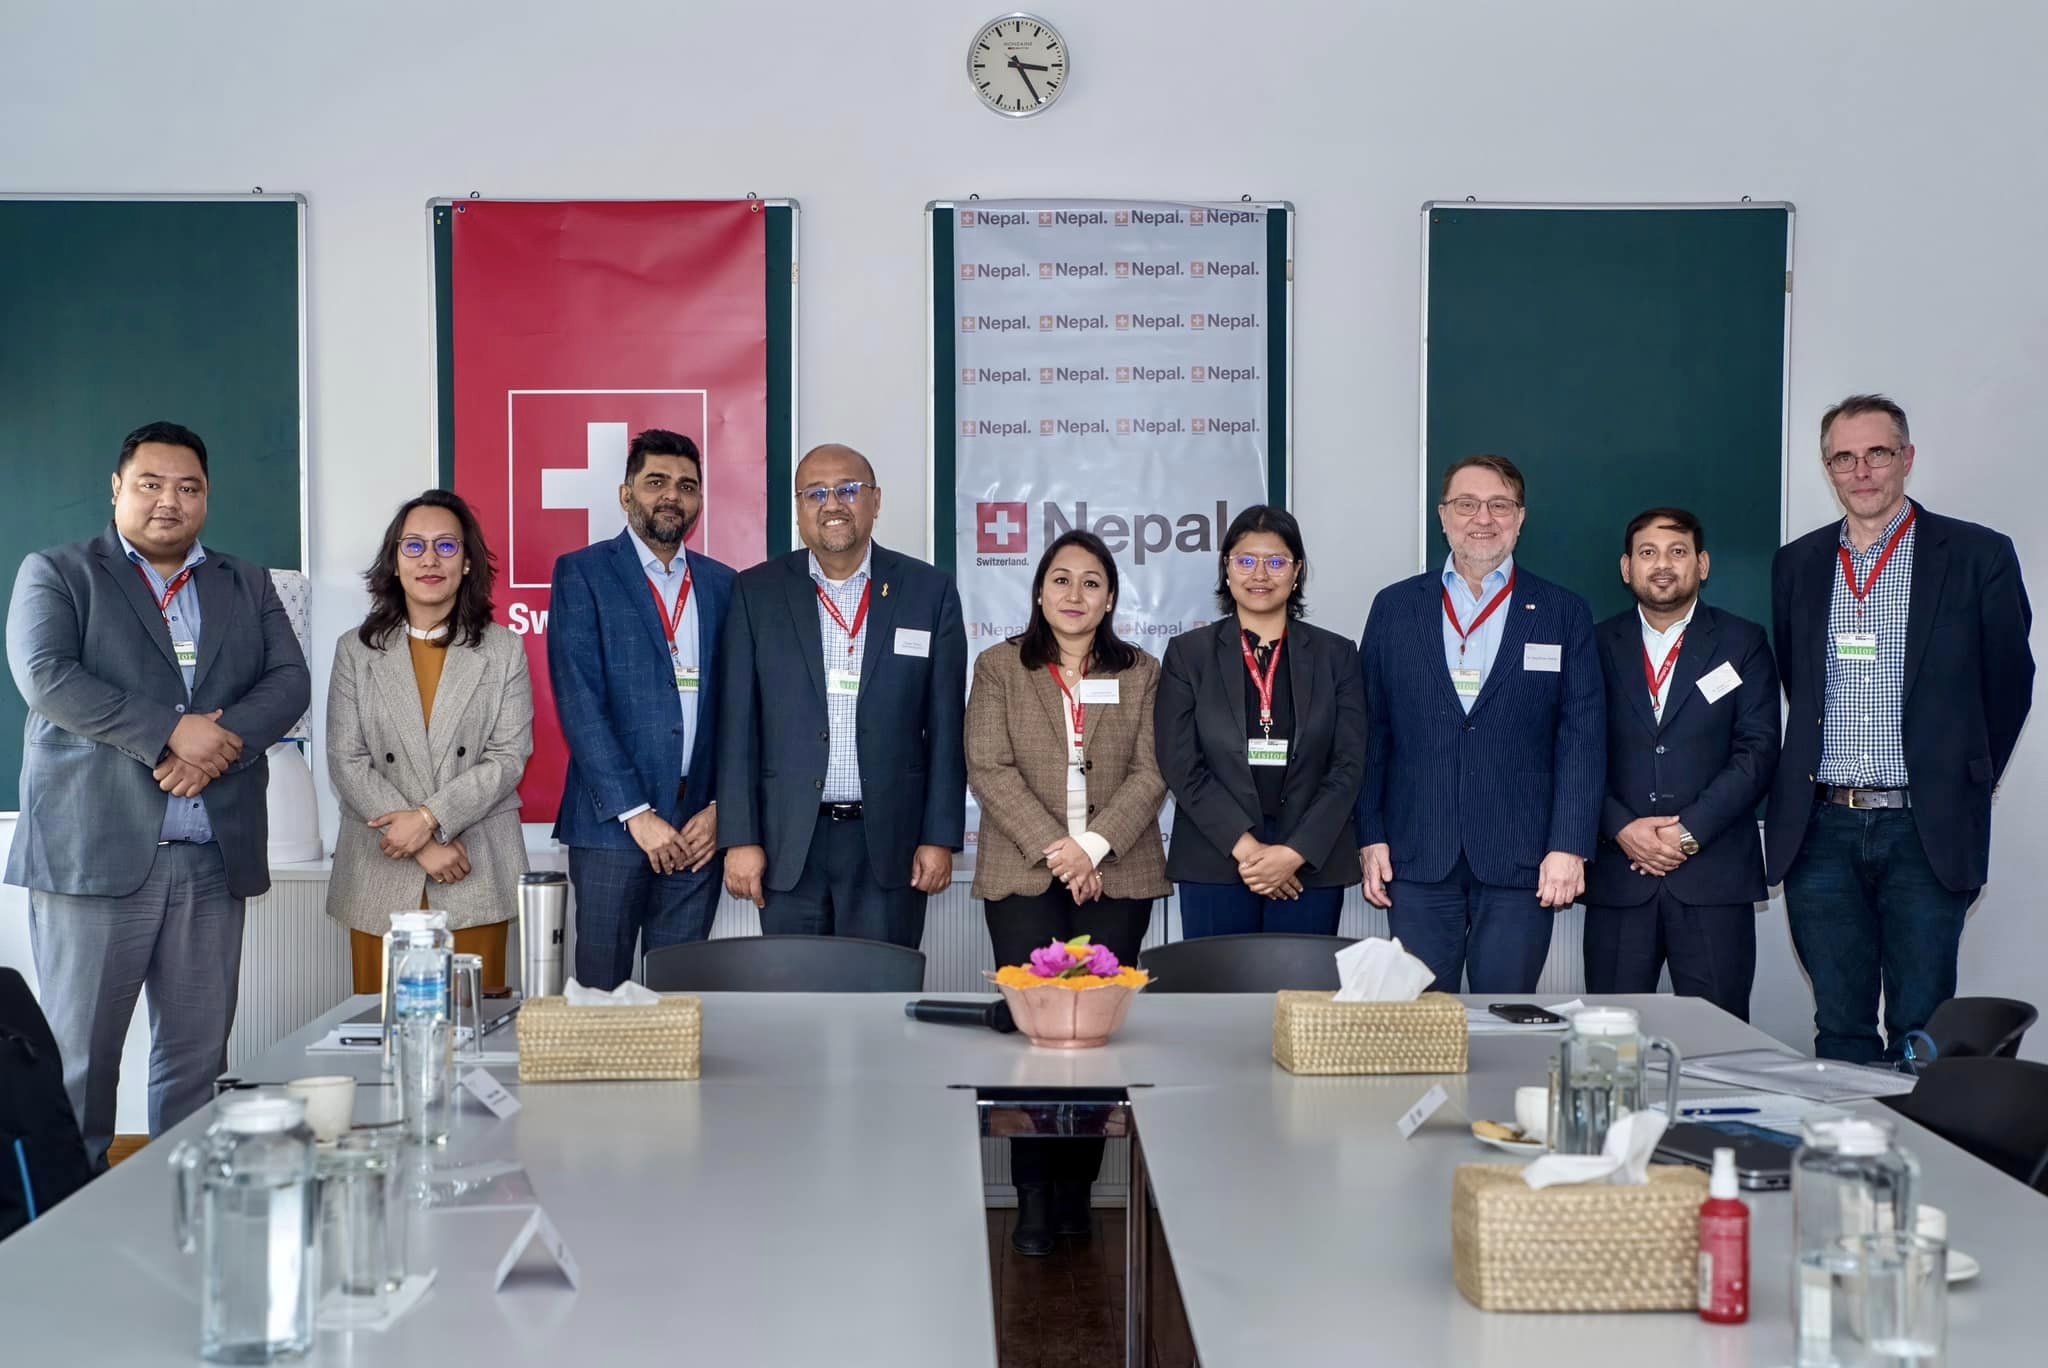 Swiss business delegation visits Nepal to explore business opportunities